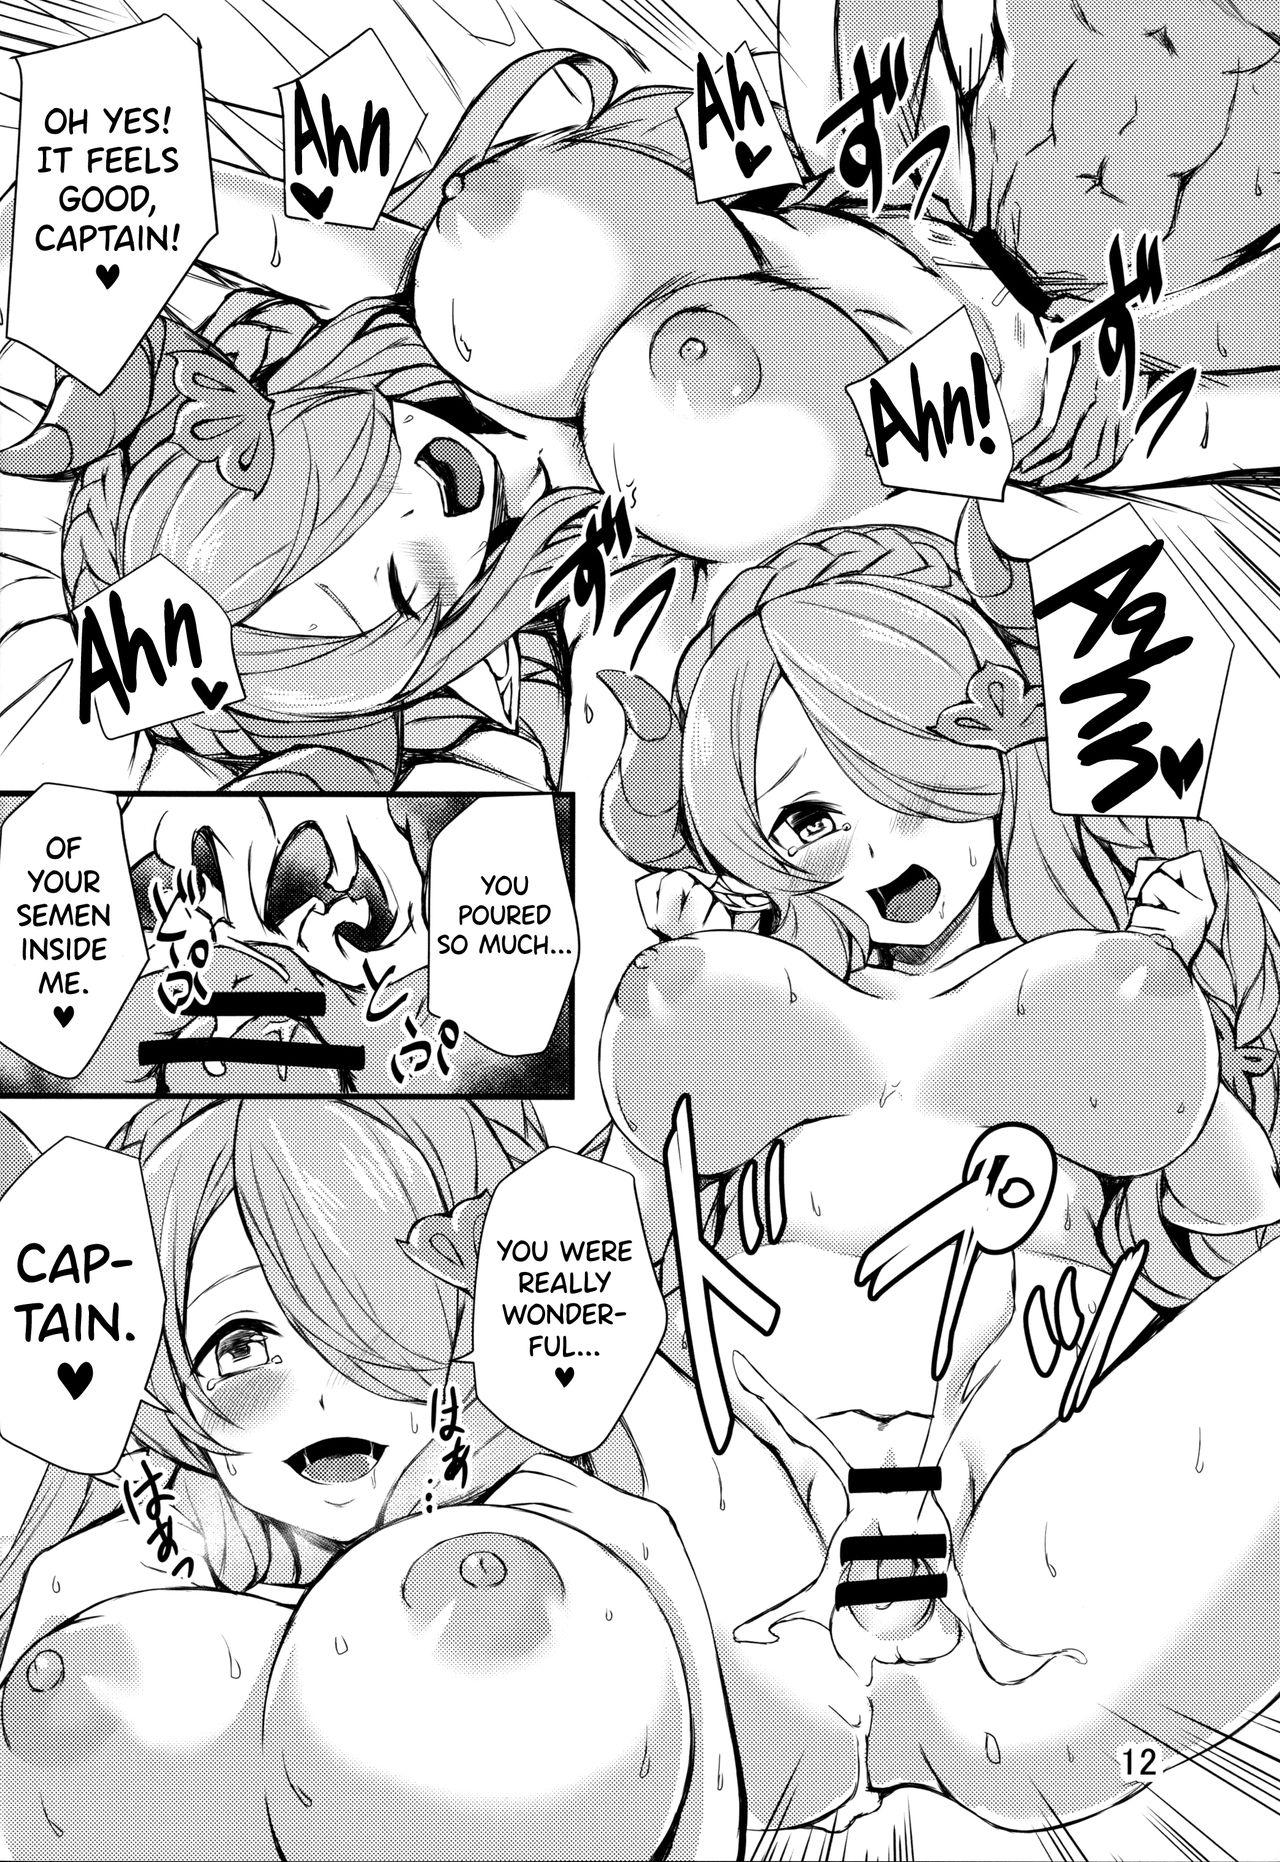 Clothed Sleepless Night at the Female Draph's Room - Granblue fantasy Huge - Page 11